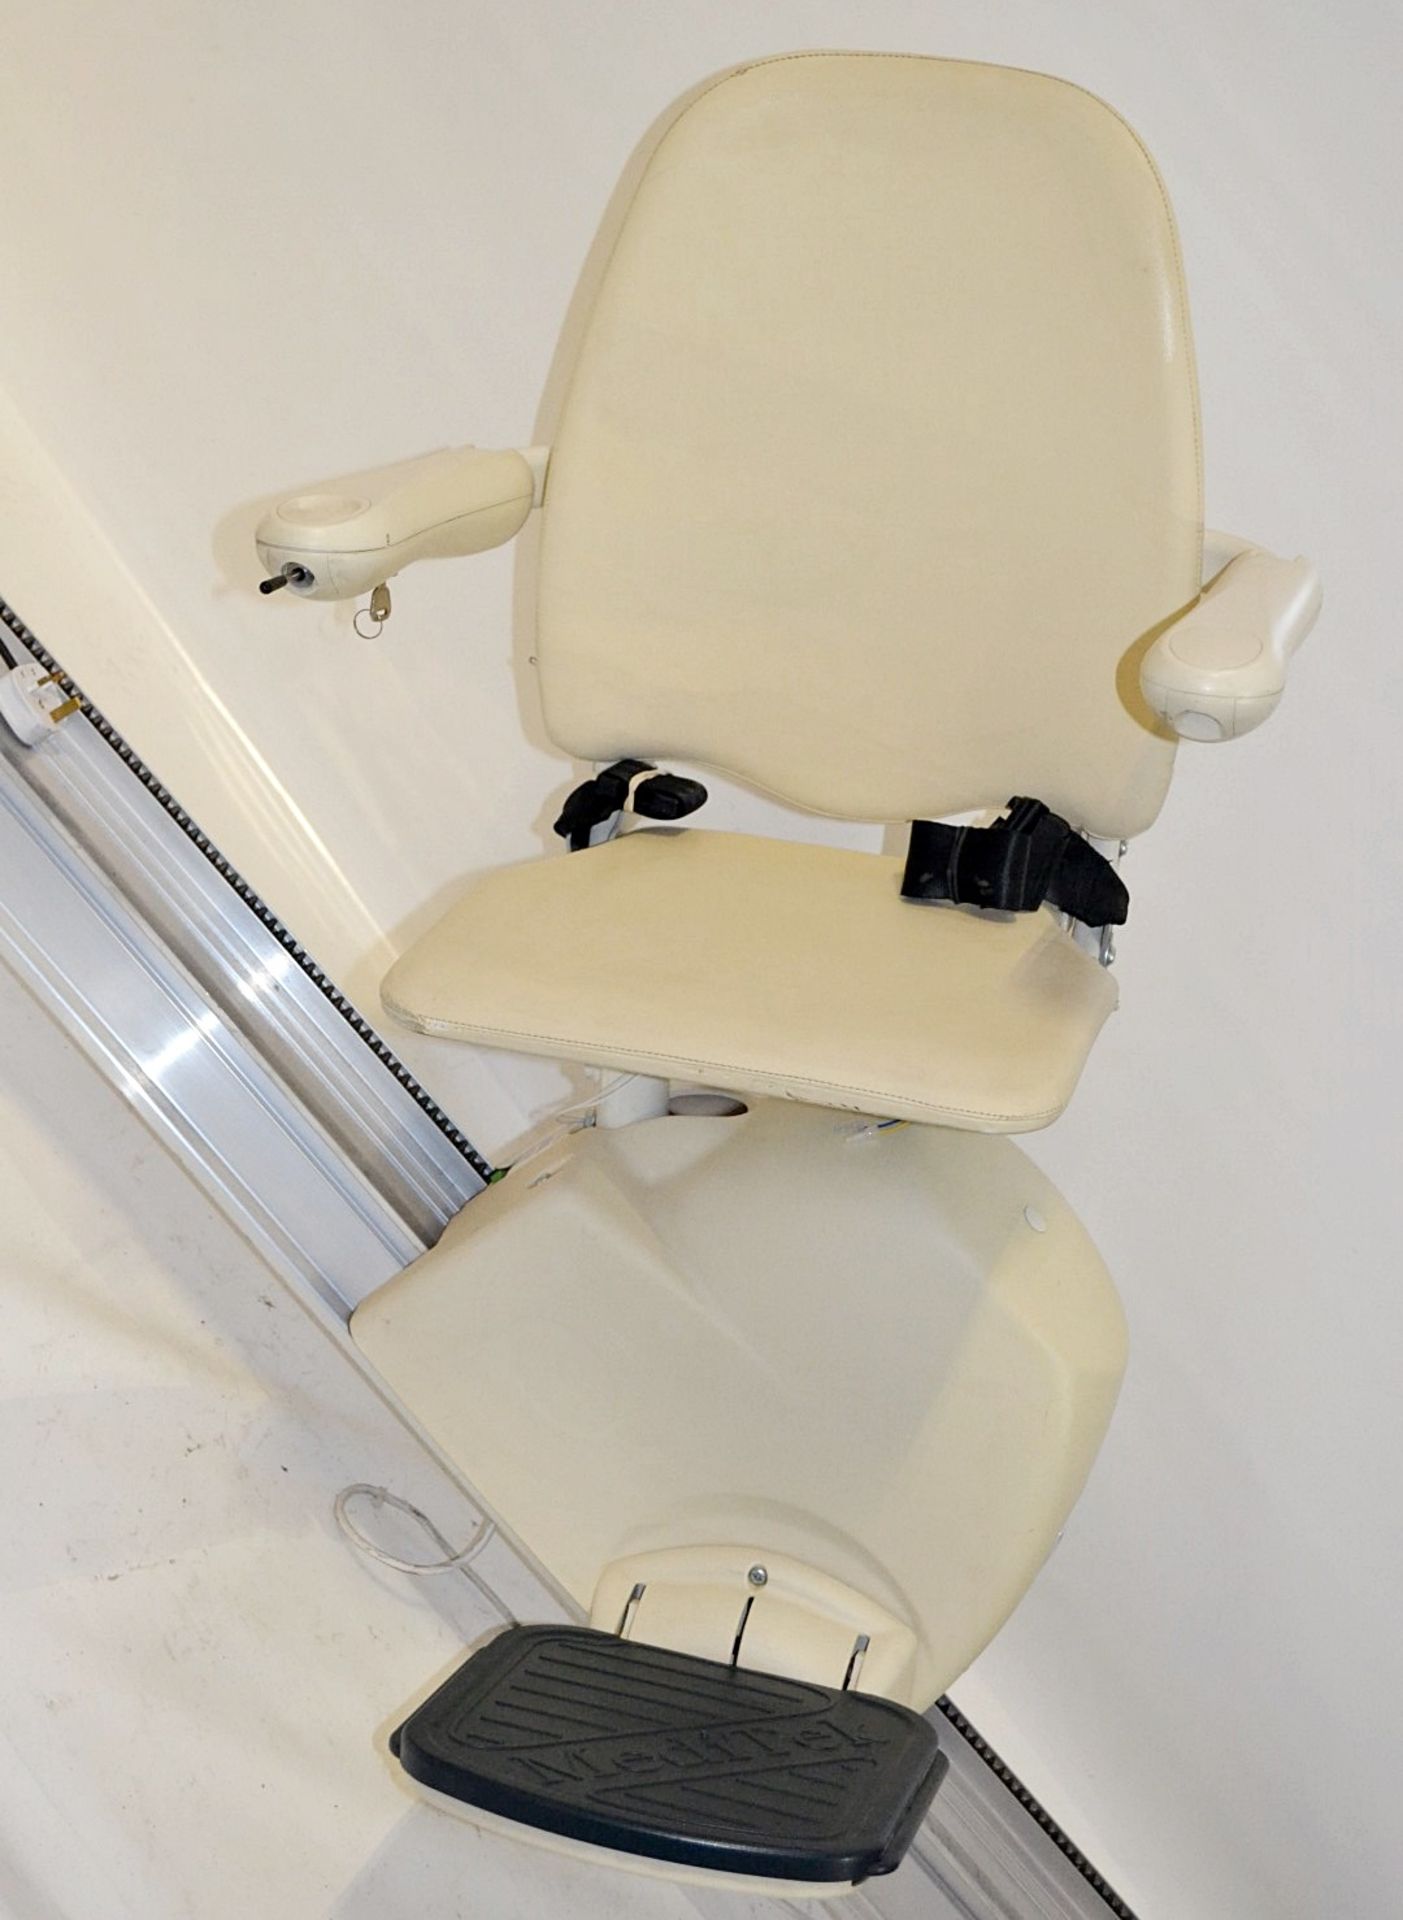 1 x Meditek D120 Deluxe Ascending Straight Stairlift With Powered Swivel Seat And Hinge Track - - Image 13 of 22